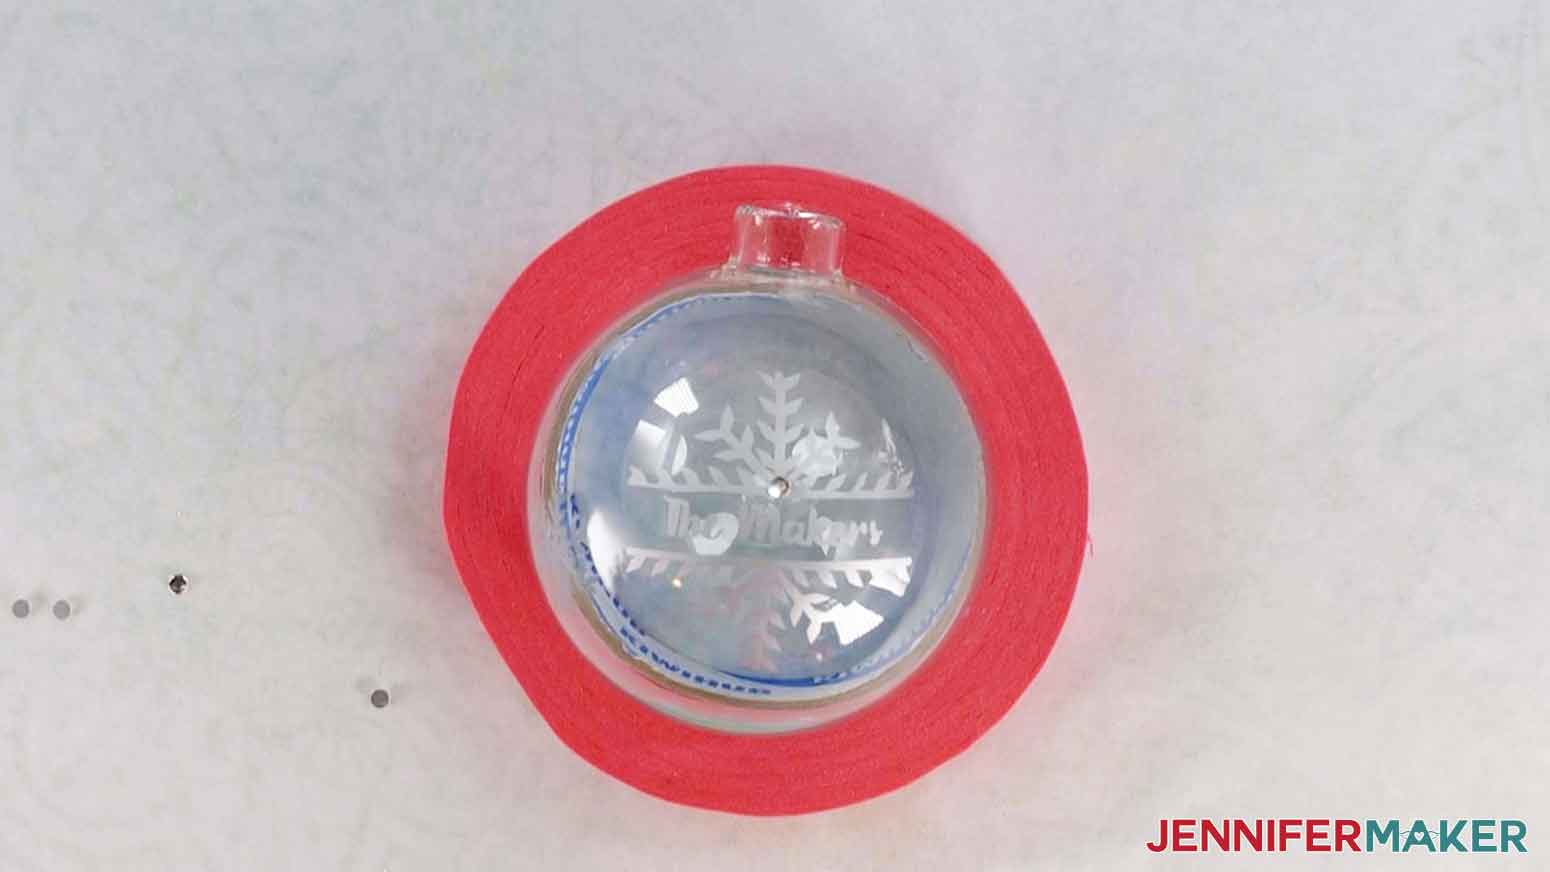 Etched glass ornament inside painter's tape roll with crystals applied to its surface